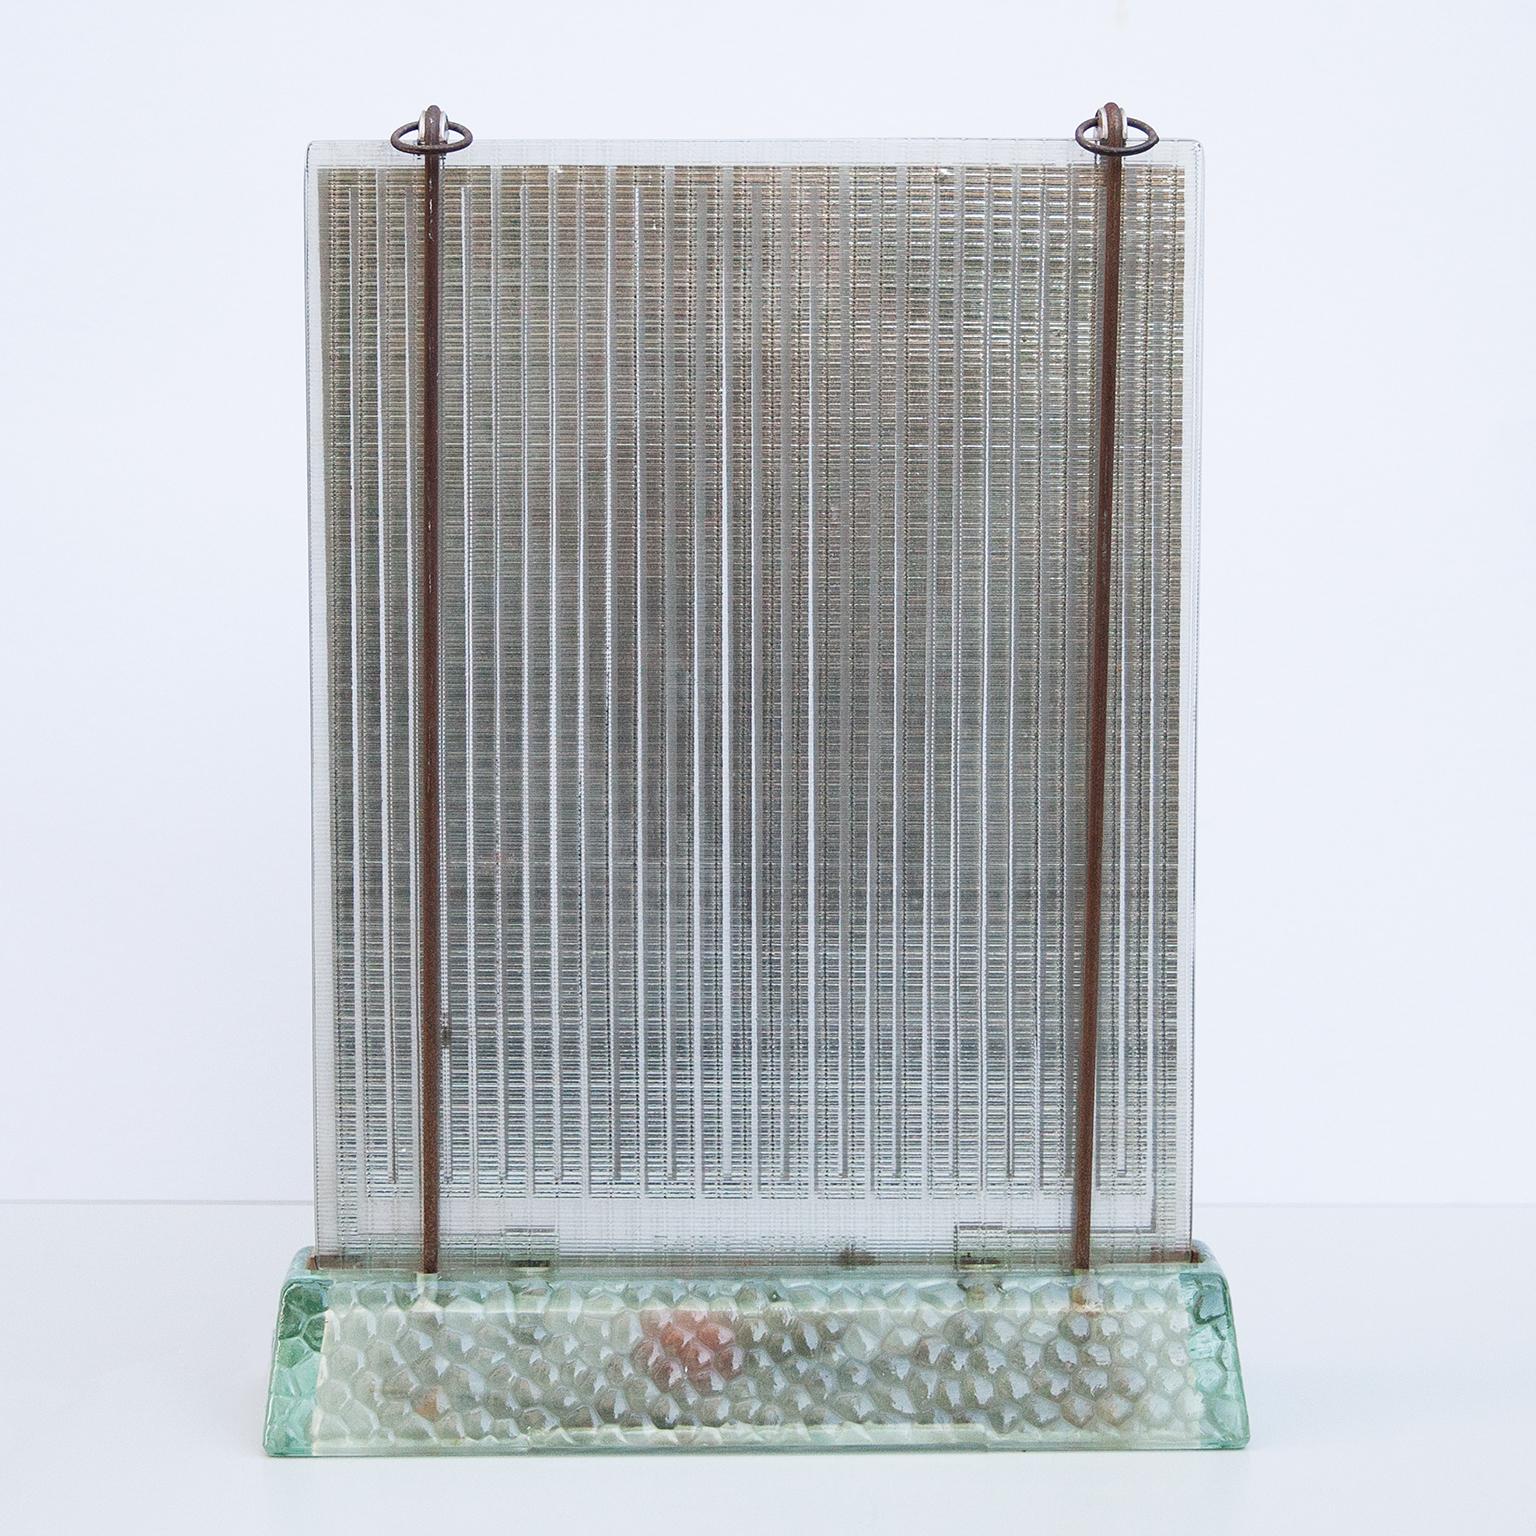 Art Deco Glass Radiator designed by René-André Coulon, and entitled “Radiaver” this revolutionary design for a space heater, which also has built in illumination boldly suggests the future. It is inscribed “SAINT-GOBAIN” on the base. Could be used